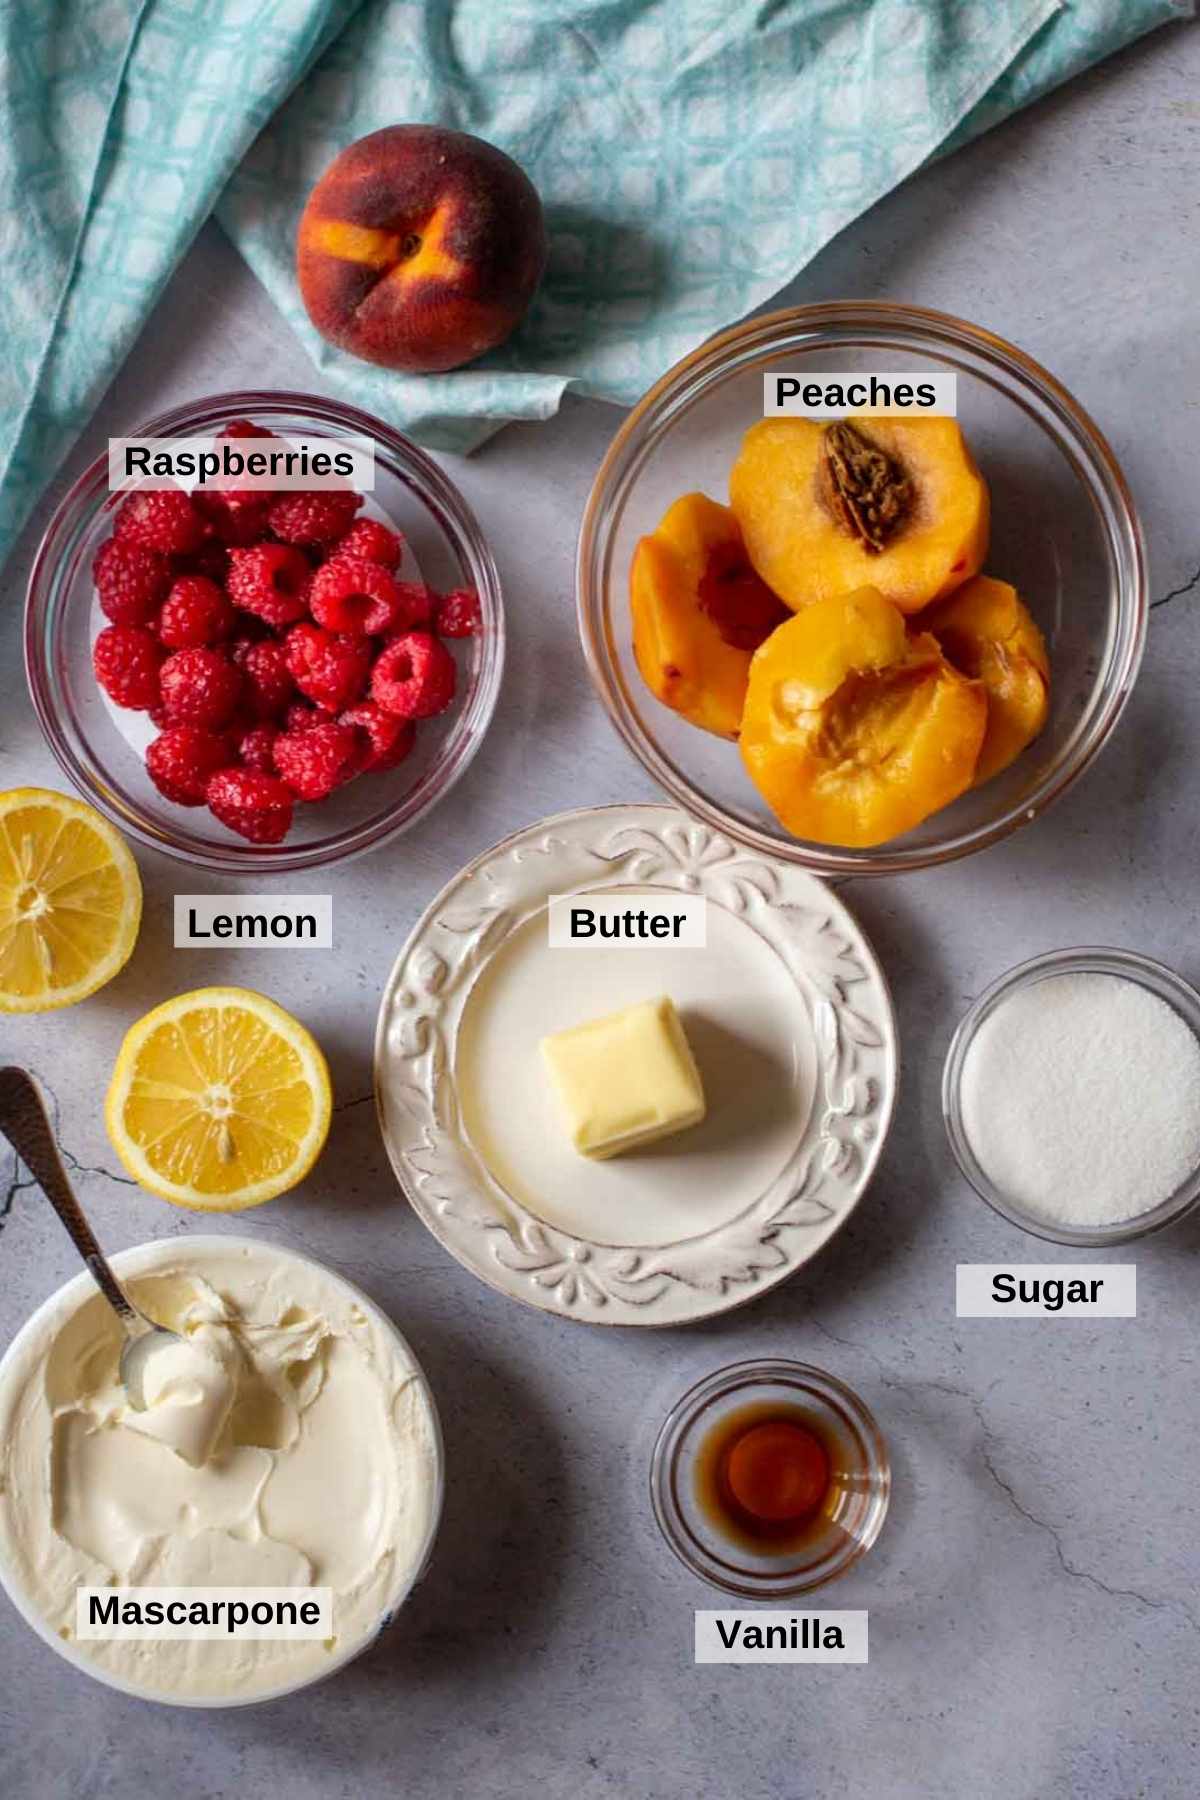 Ingredients to make roasted peaches with mascarpone.